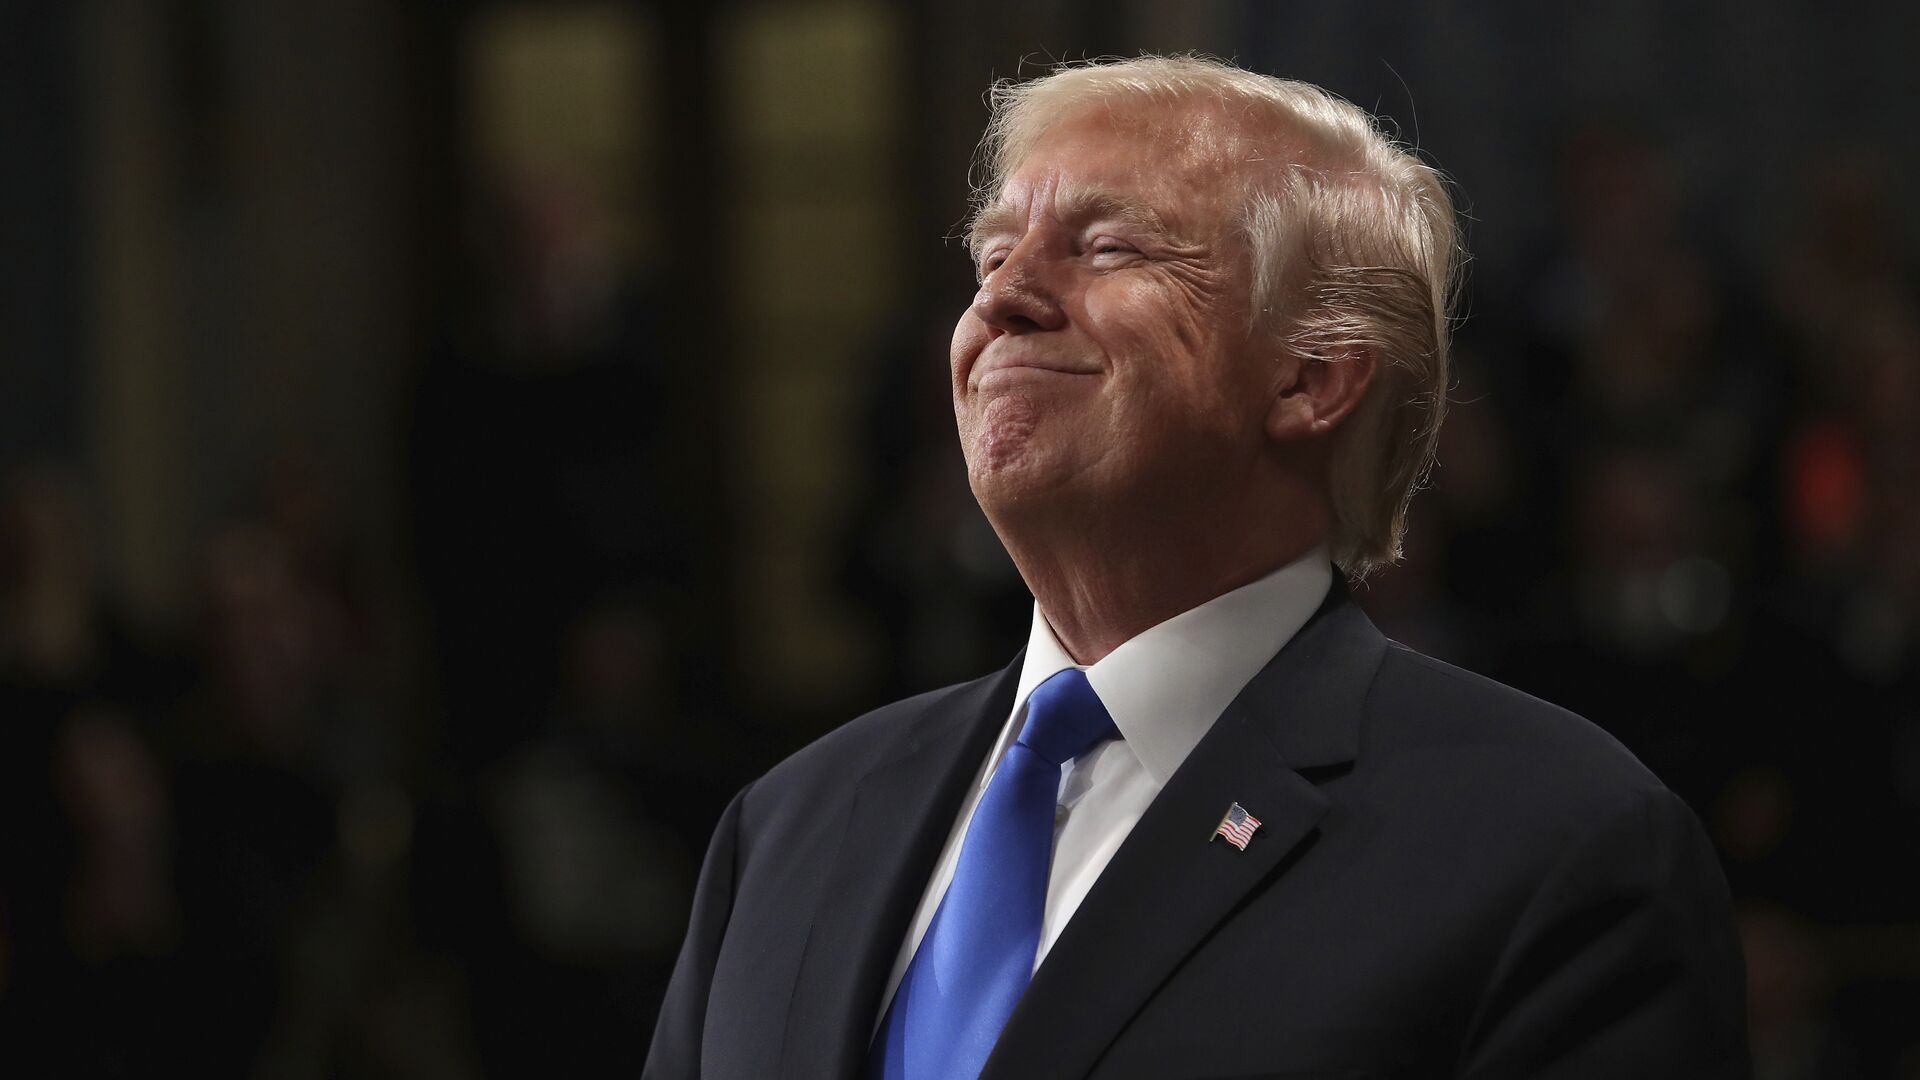 President Donald Trump smiles during State of the Union address in the House chamber of the U.S. Capitol to a joint session of Congress Tuesday, Jan. 30, 2018 in Washington - Sputnik International, 1920, 09.05.2021